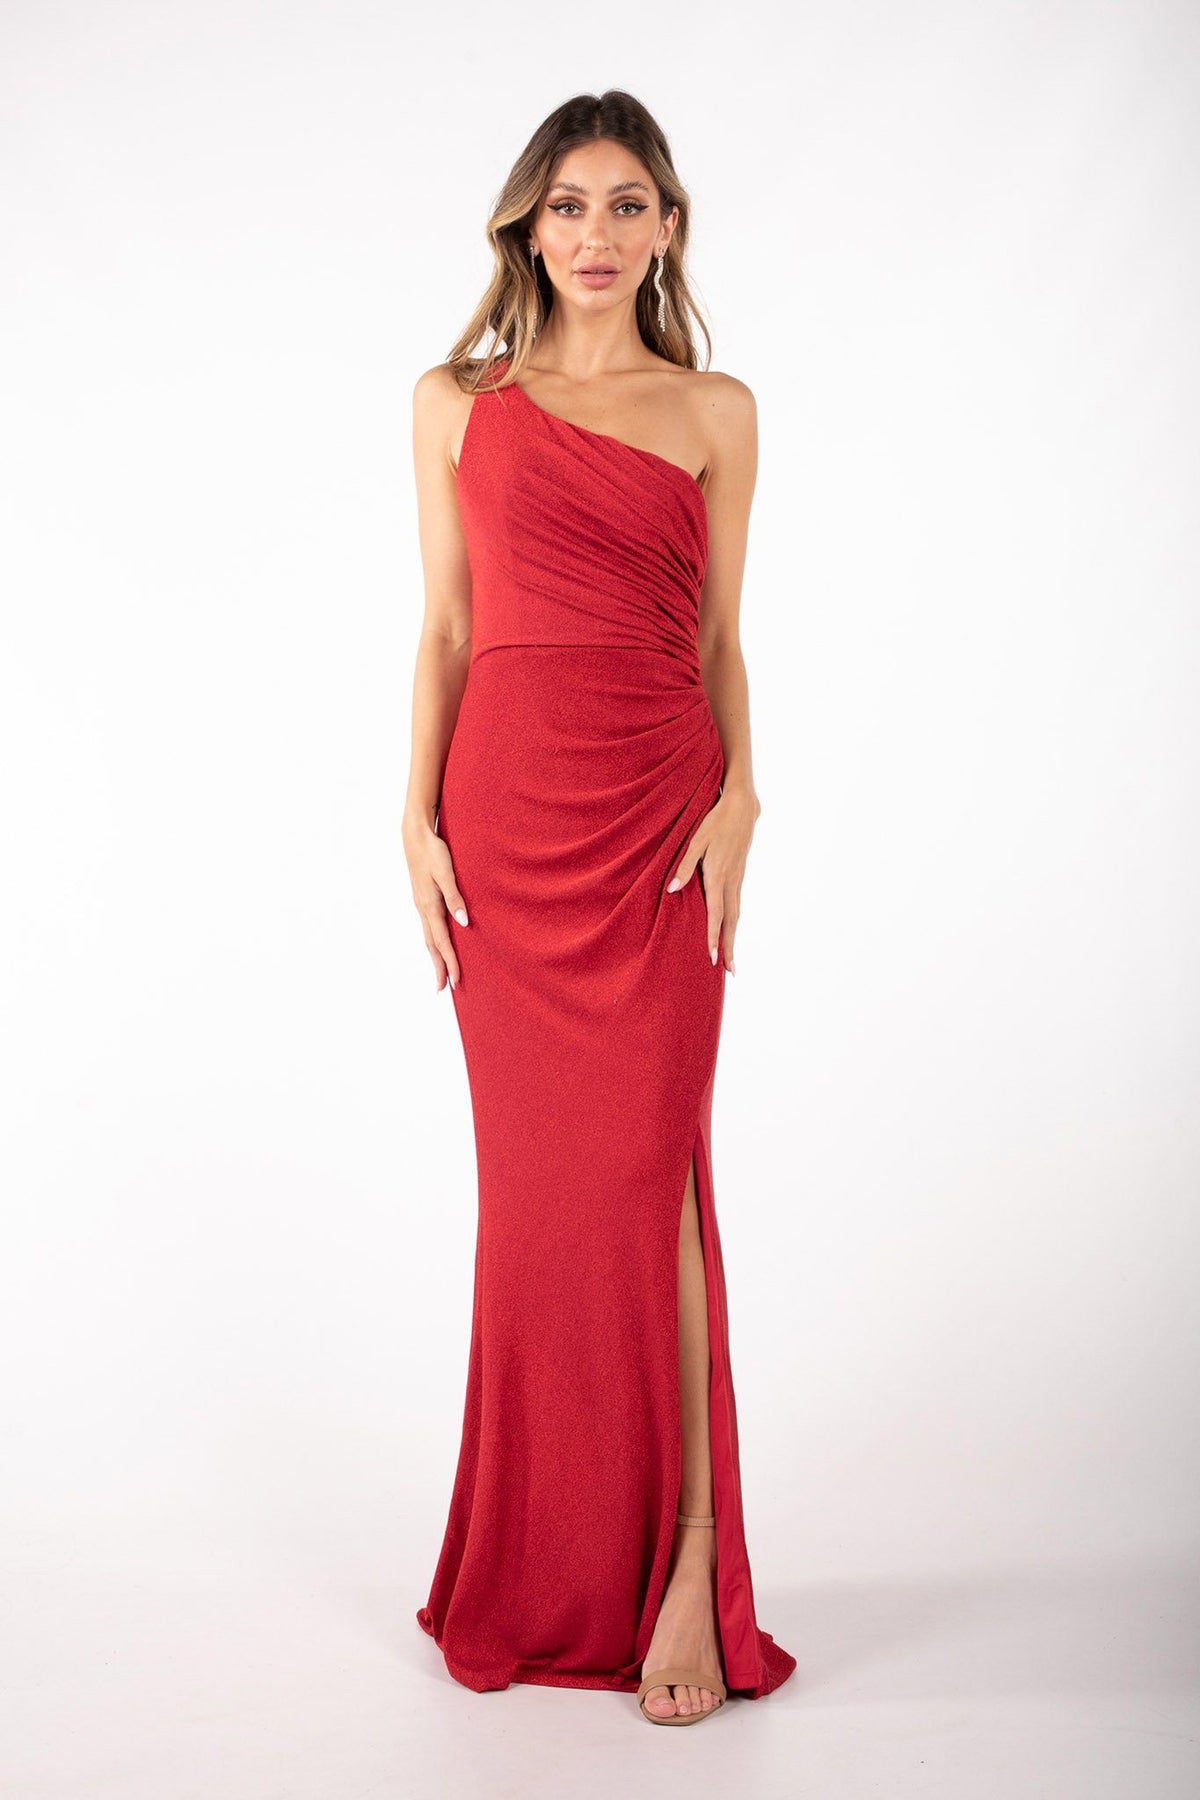 Shimmer red maxi dress featuring asymmetrical one shoulder neckline, a bodycon fit with gathering detail at the front and thigh-high leg slit